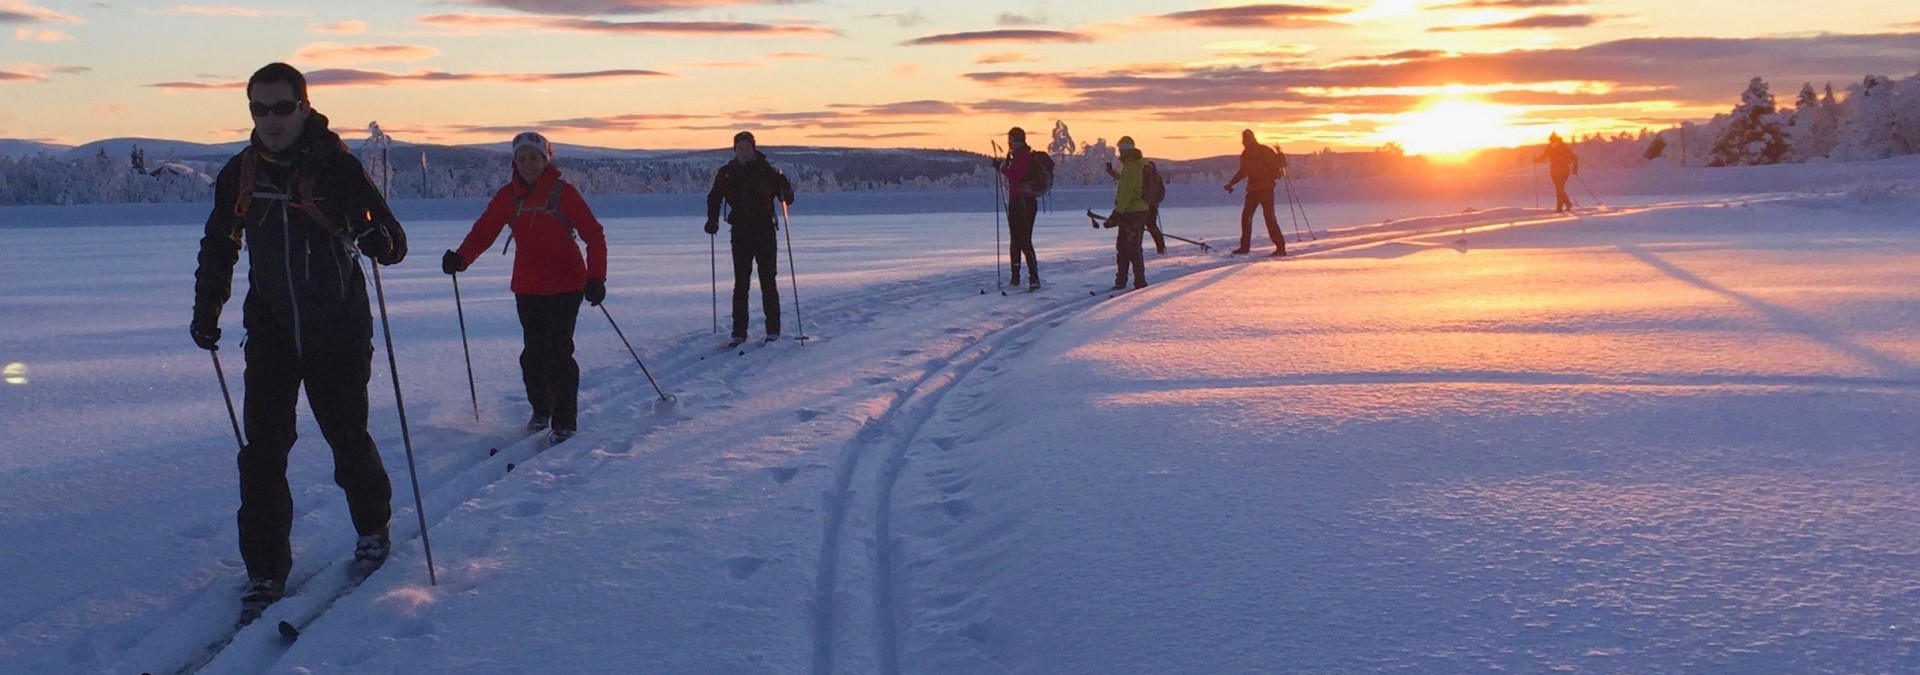 Putting our new found skills into practice on a ski journey in the sunset. Glorious!